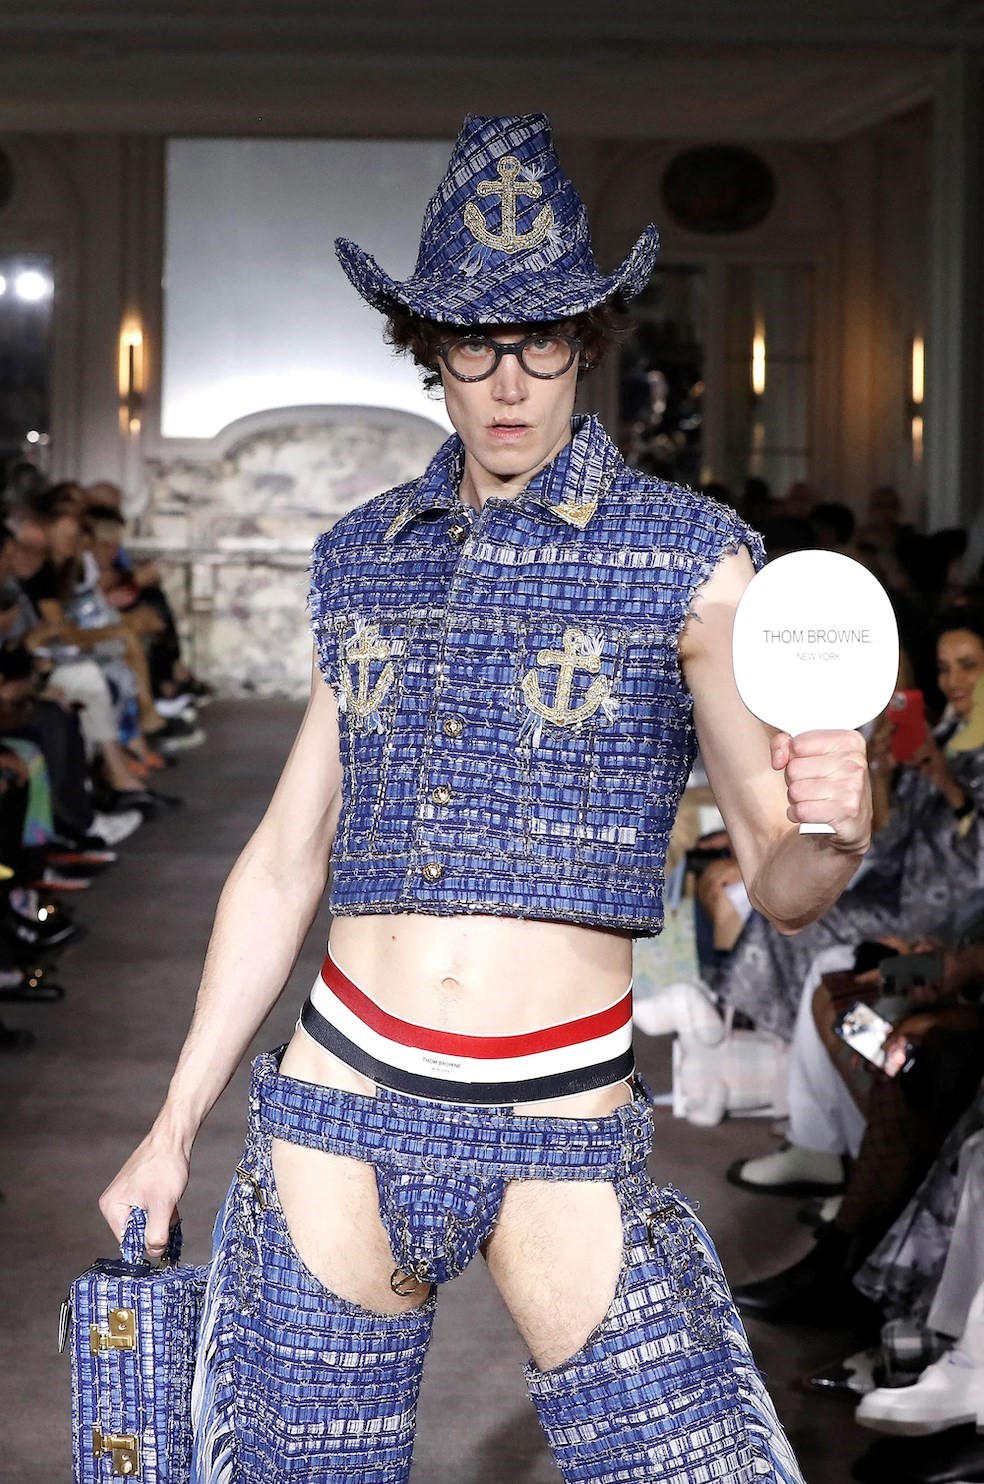 Runway Model Sex Anal - Bums out for the boys! The high fashion jockstrap rears onto the runway |  Dazed